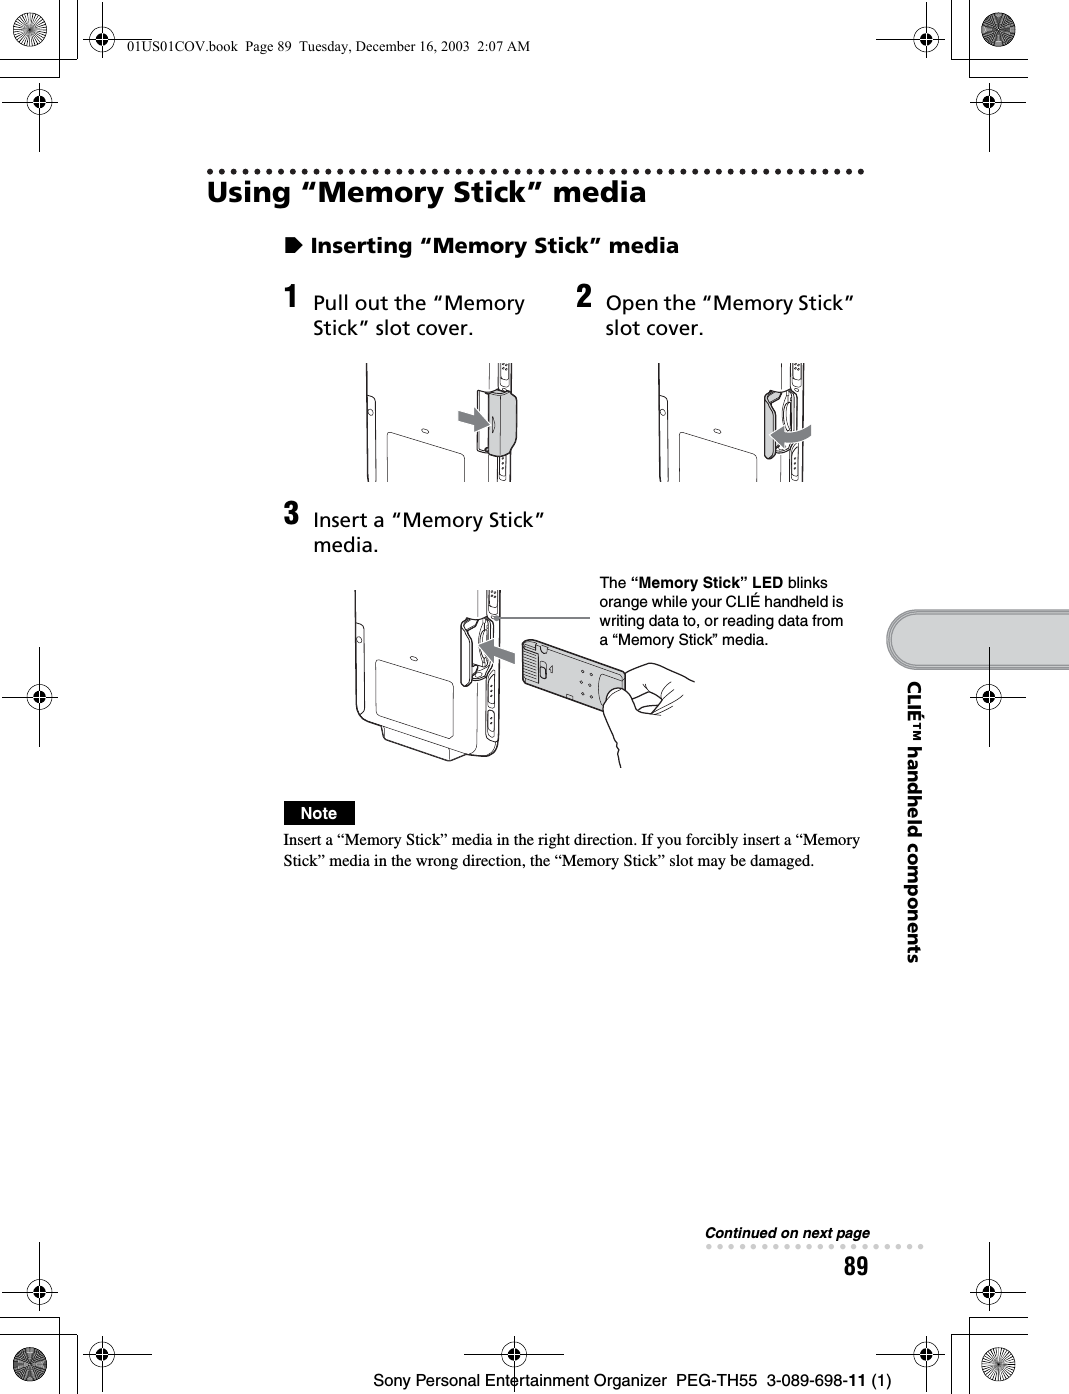 89Sony Personal Entertainment Organizer  PEG-TH55  3-089-698-11 (1)CLIÉ™ handheld componentsUsing “Memory Stick” mediazInserting “Memory Stick” mediaNoteInsert a “Memory Stick” media in the right direction. If you forcibly insert a “Memory Stick” media in the wrong direction, the “Memory Stick” slot may be damaged.1Pull out the “Memory Stick” slot cover.2Open the “Memory Stick” slot cover.3Insert a “Memory Stick” media.The “Memory Stick” LED blinks orange while your CLIÉ handheld is writing data to, or reading data from a “Memory Stick” media.Continued on next page• • • • • • • • • • • • • • • • • • • •01US01COV.book  Page 89  Tuesday, December 16, 2003  2:07 AM